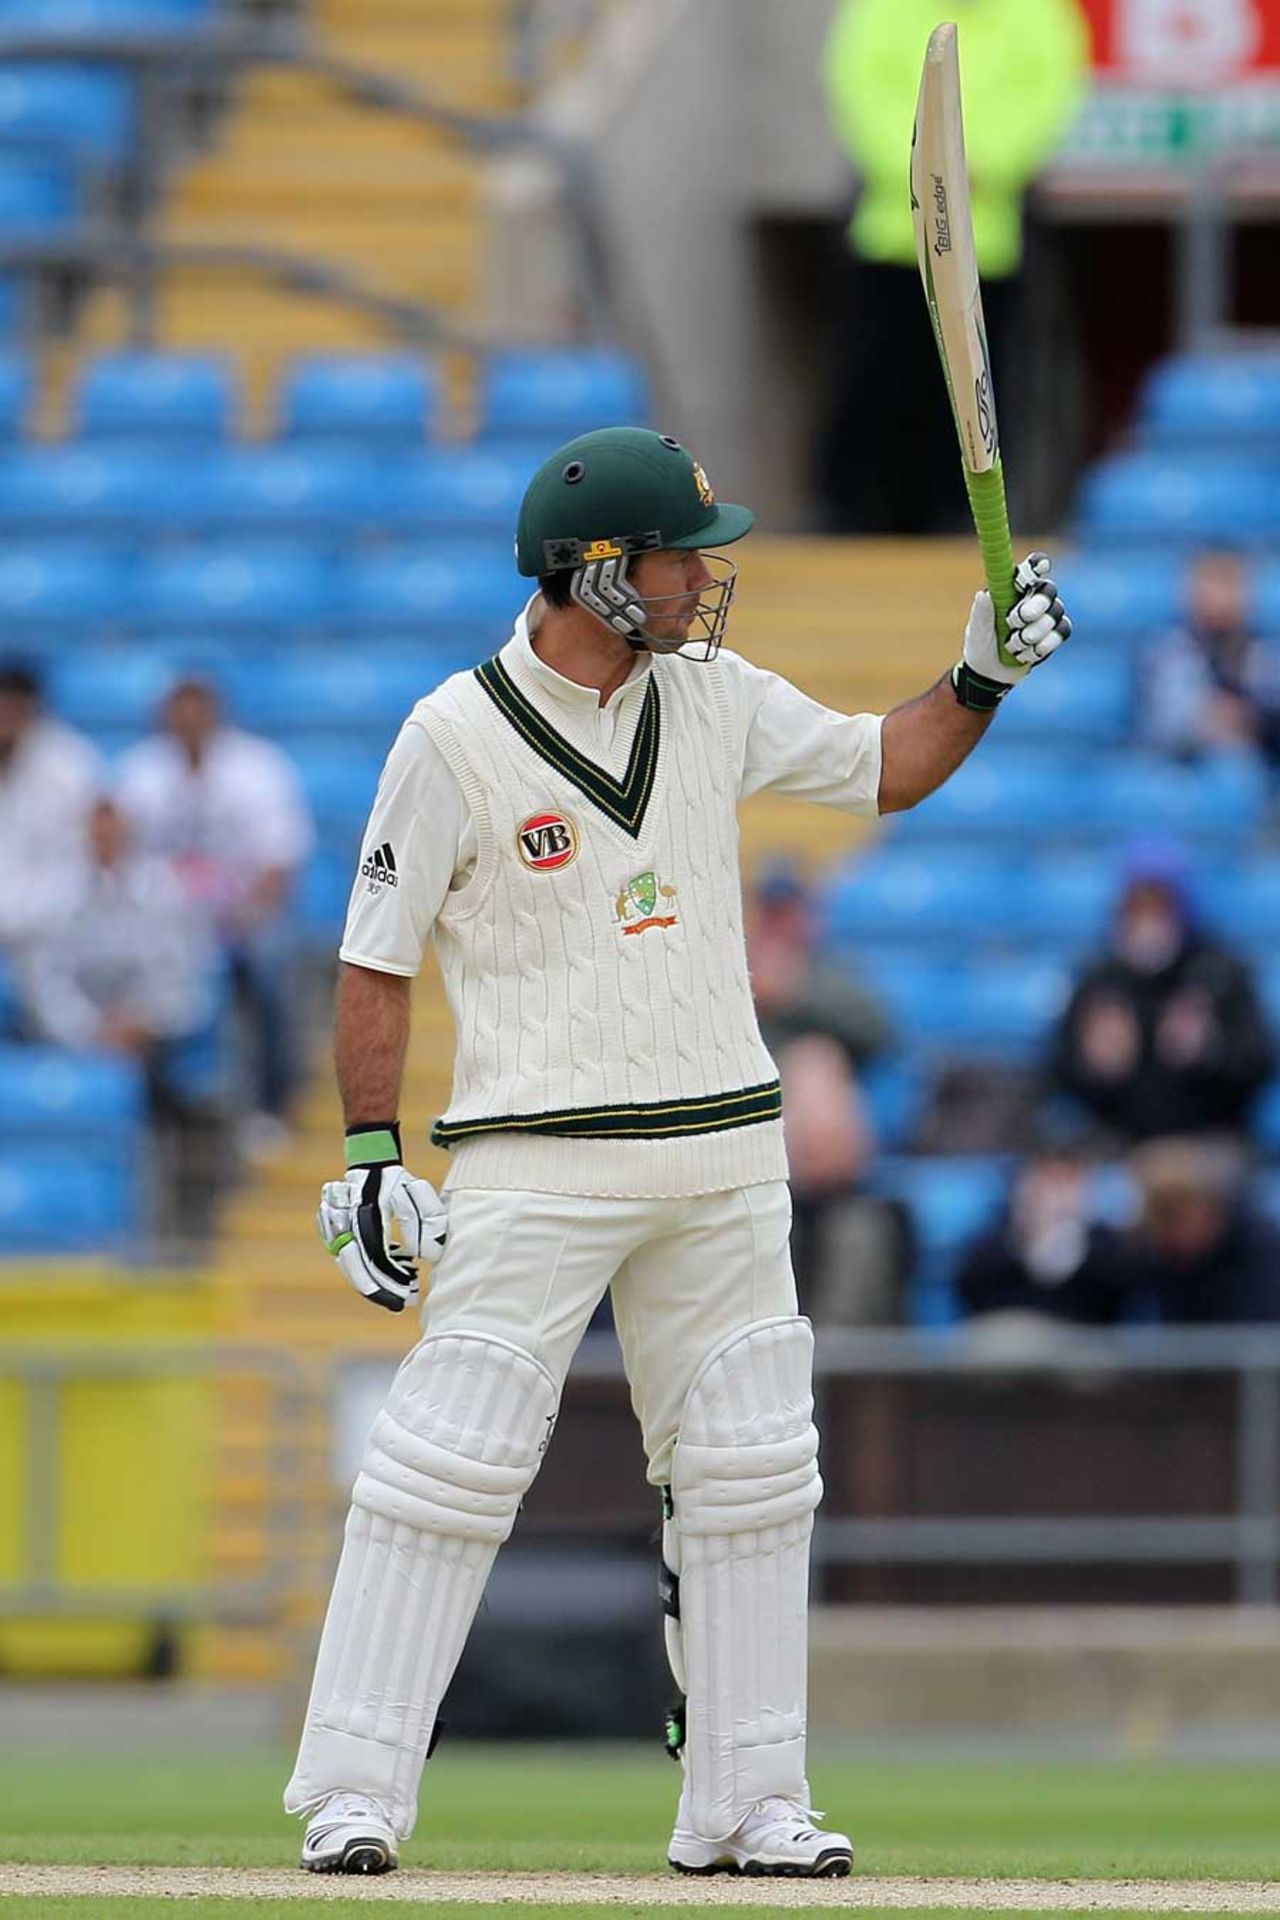 Ricky Ponting acknowledges the applause for his fighting half-century on the second day at Headingley, Pakistan v Australia, 2nd Test, Headingley, July 22, 2010